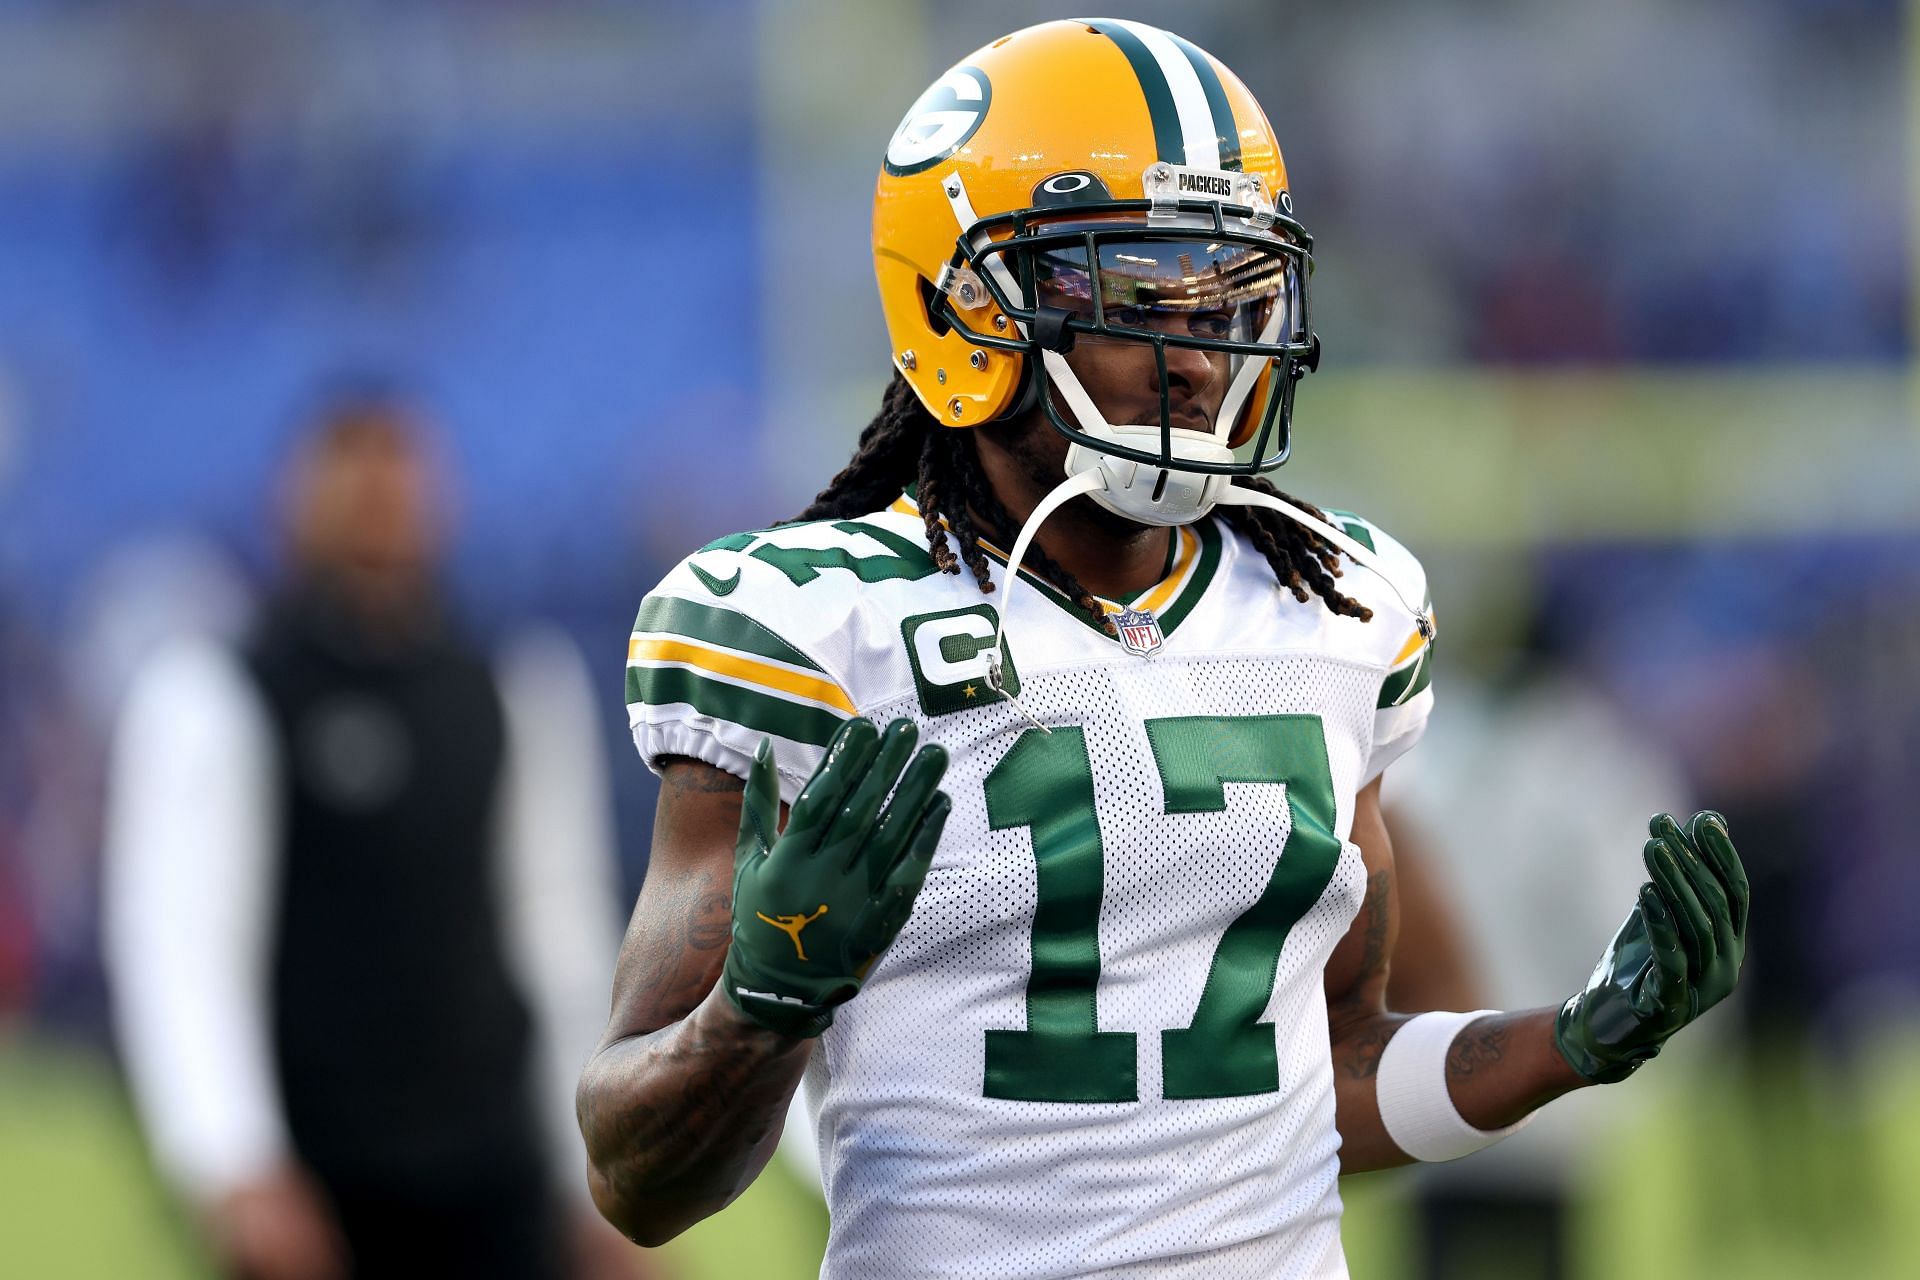 Davante Adams has completed the switch from Green Bay to Las Vegas